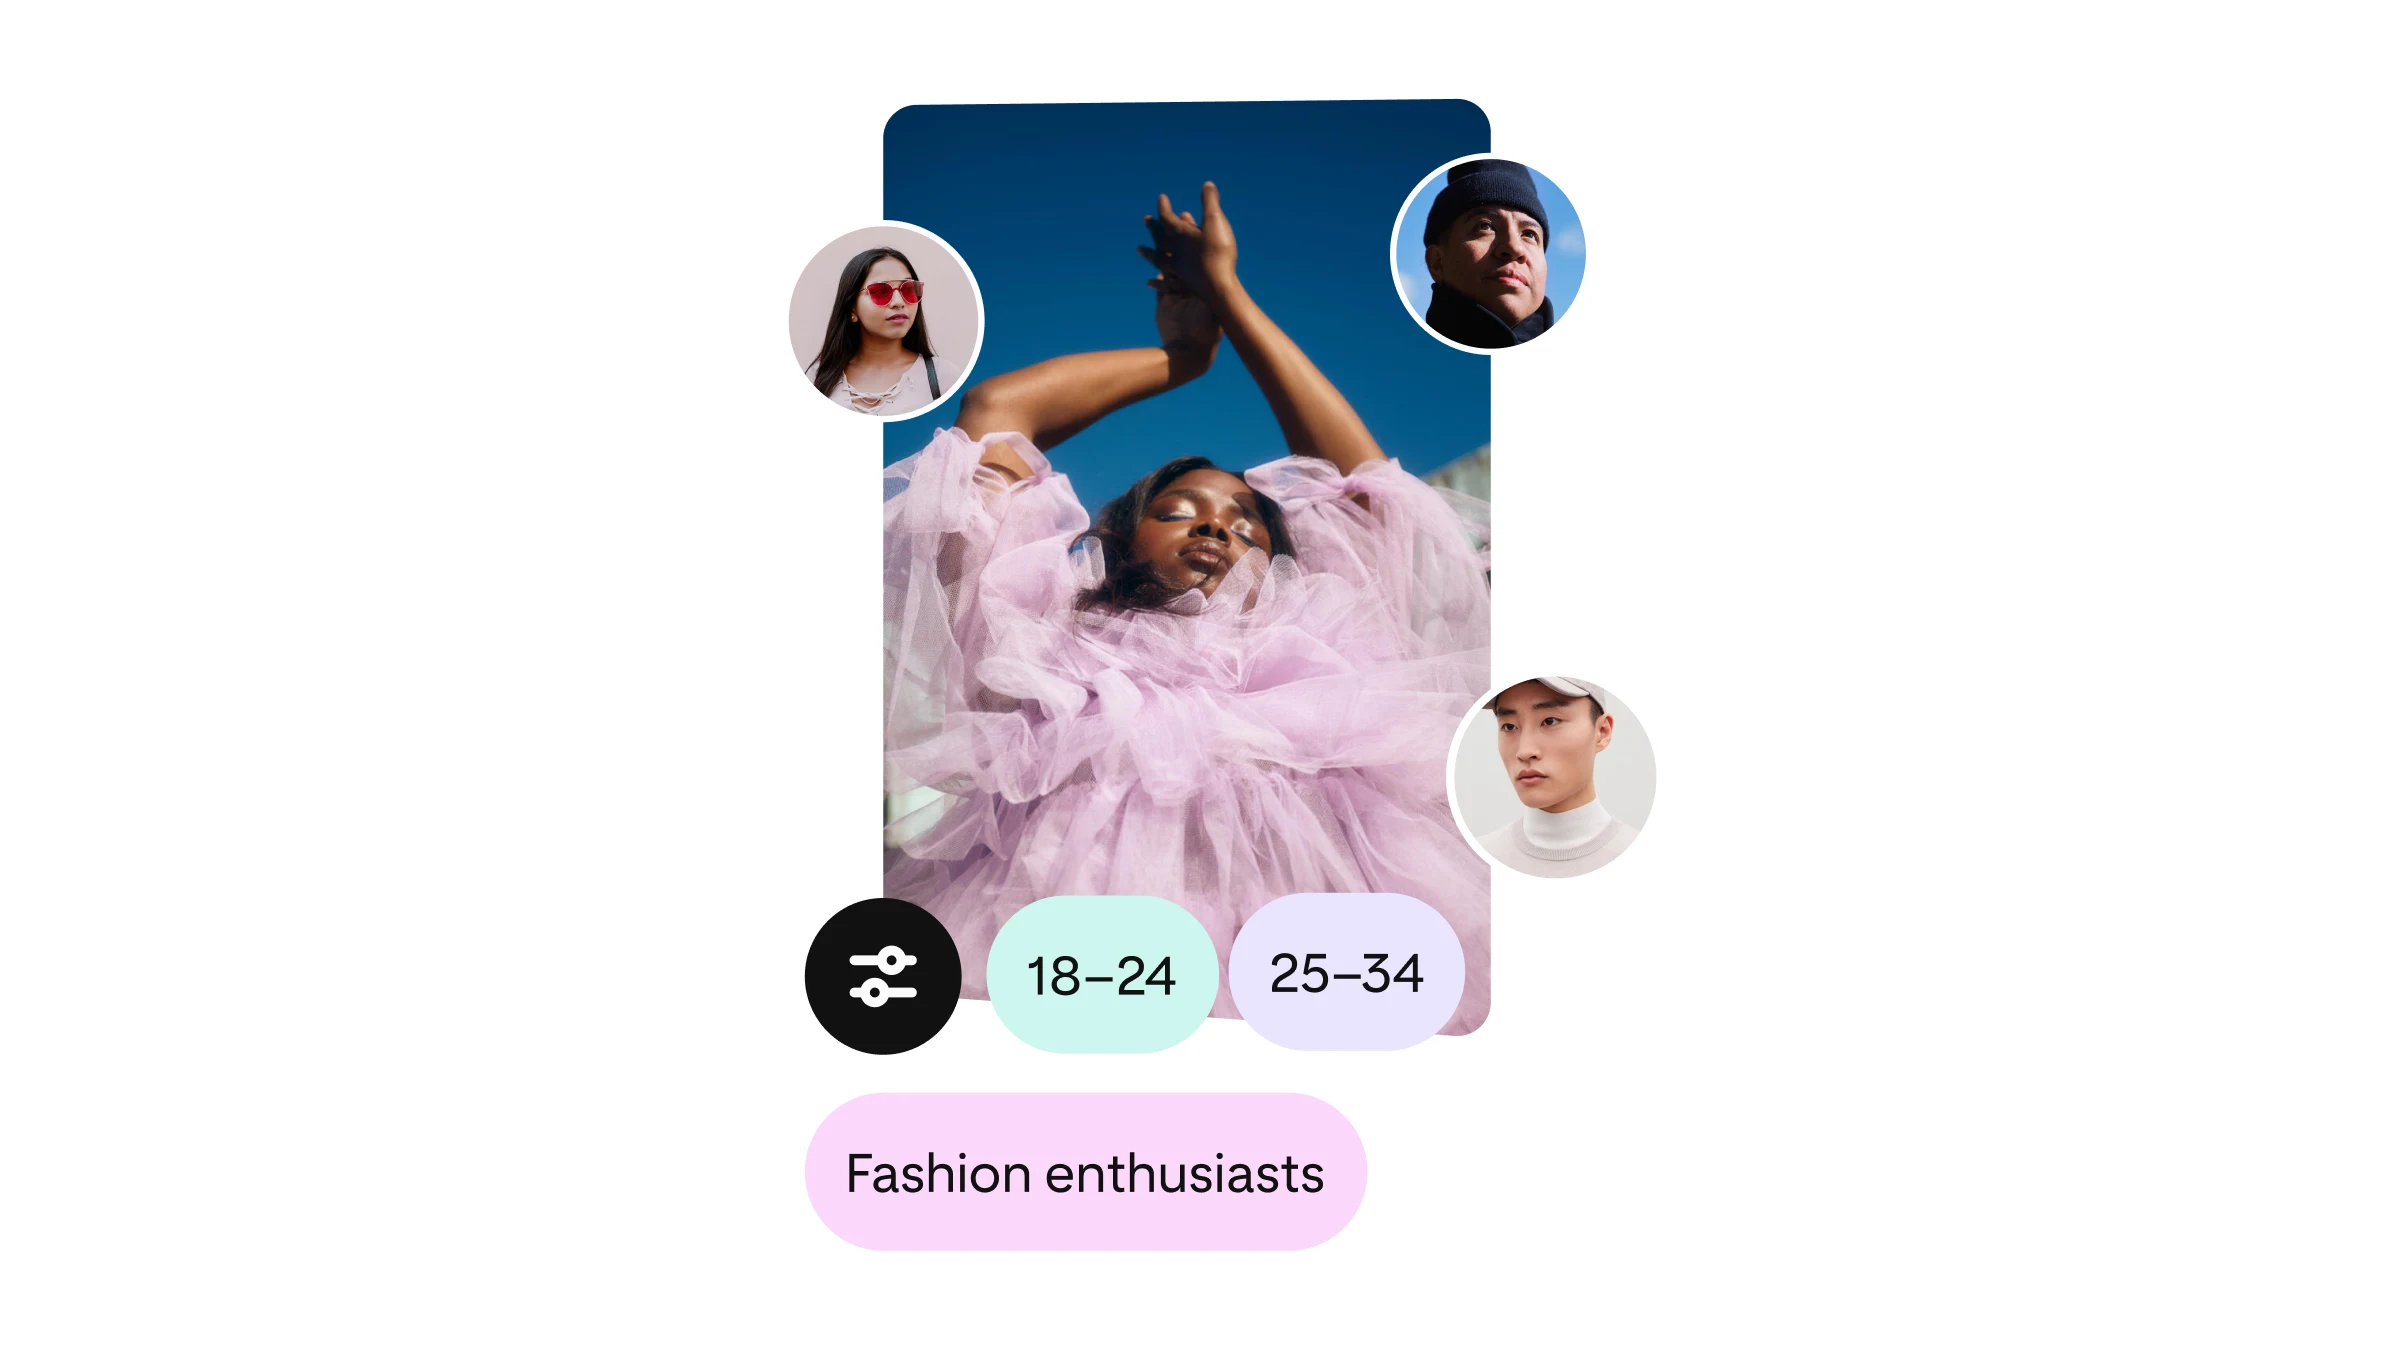 A woman in pink tulle is surrounded by faces of other potential customers, with elements showing a target audience age.